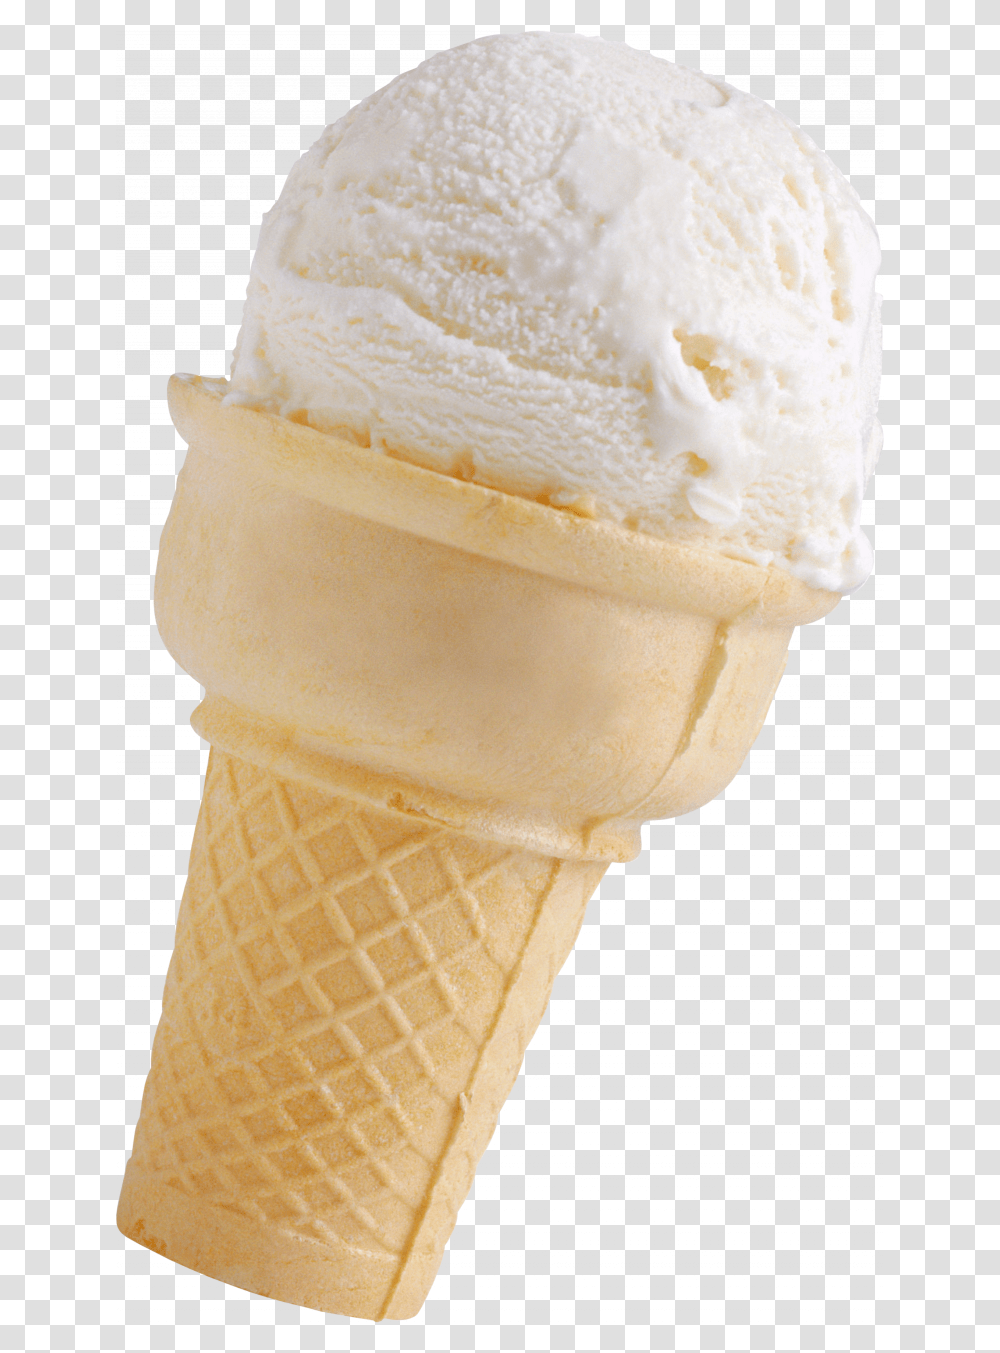 Now You Can Download Ice Cream Vanilla Ice Cream Background, Dessert, Food, Creme, Icing Transparent Png